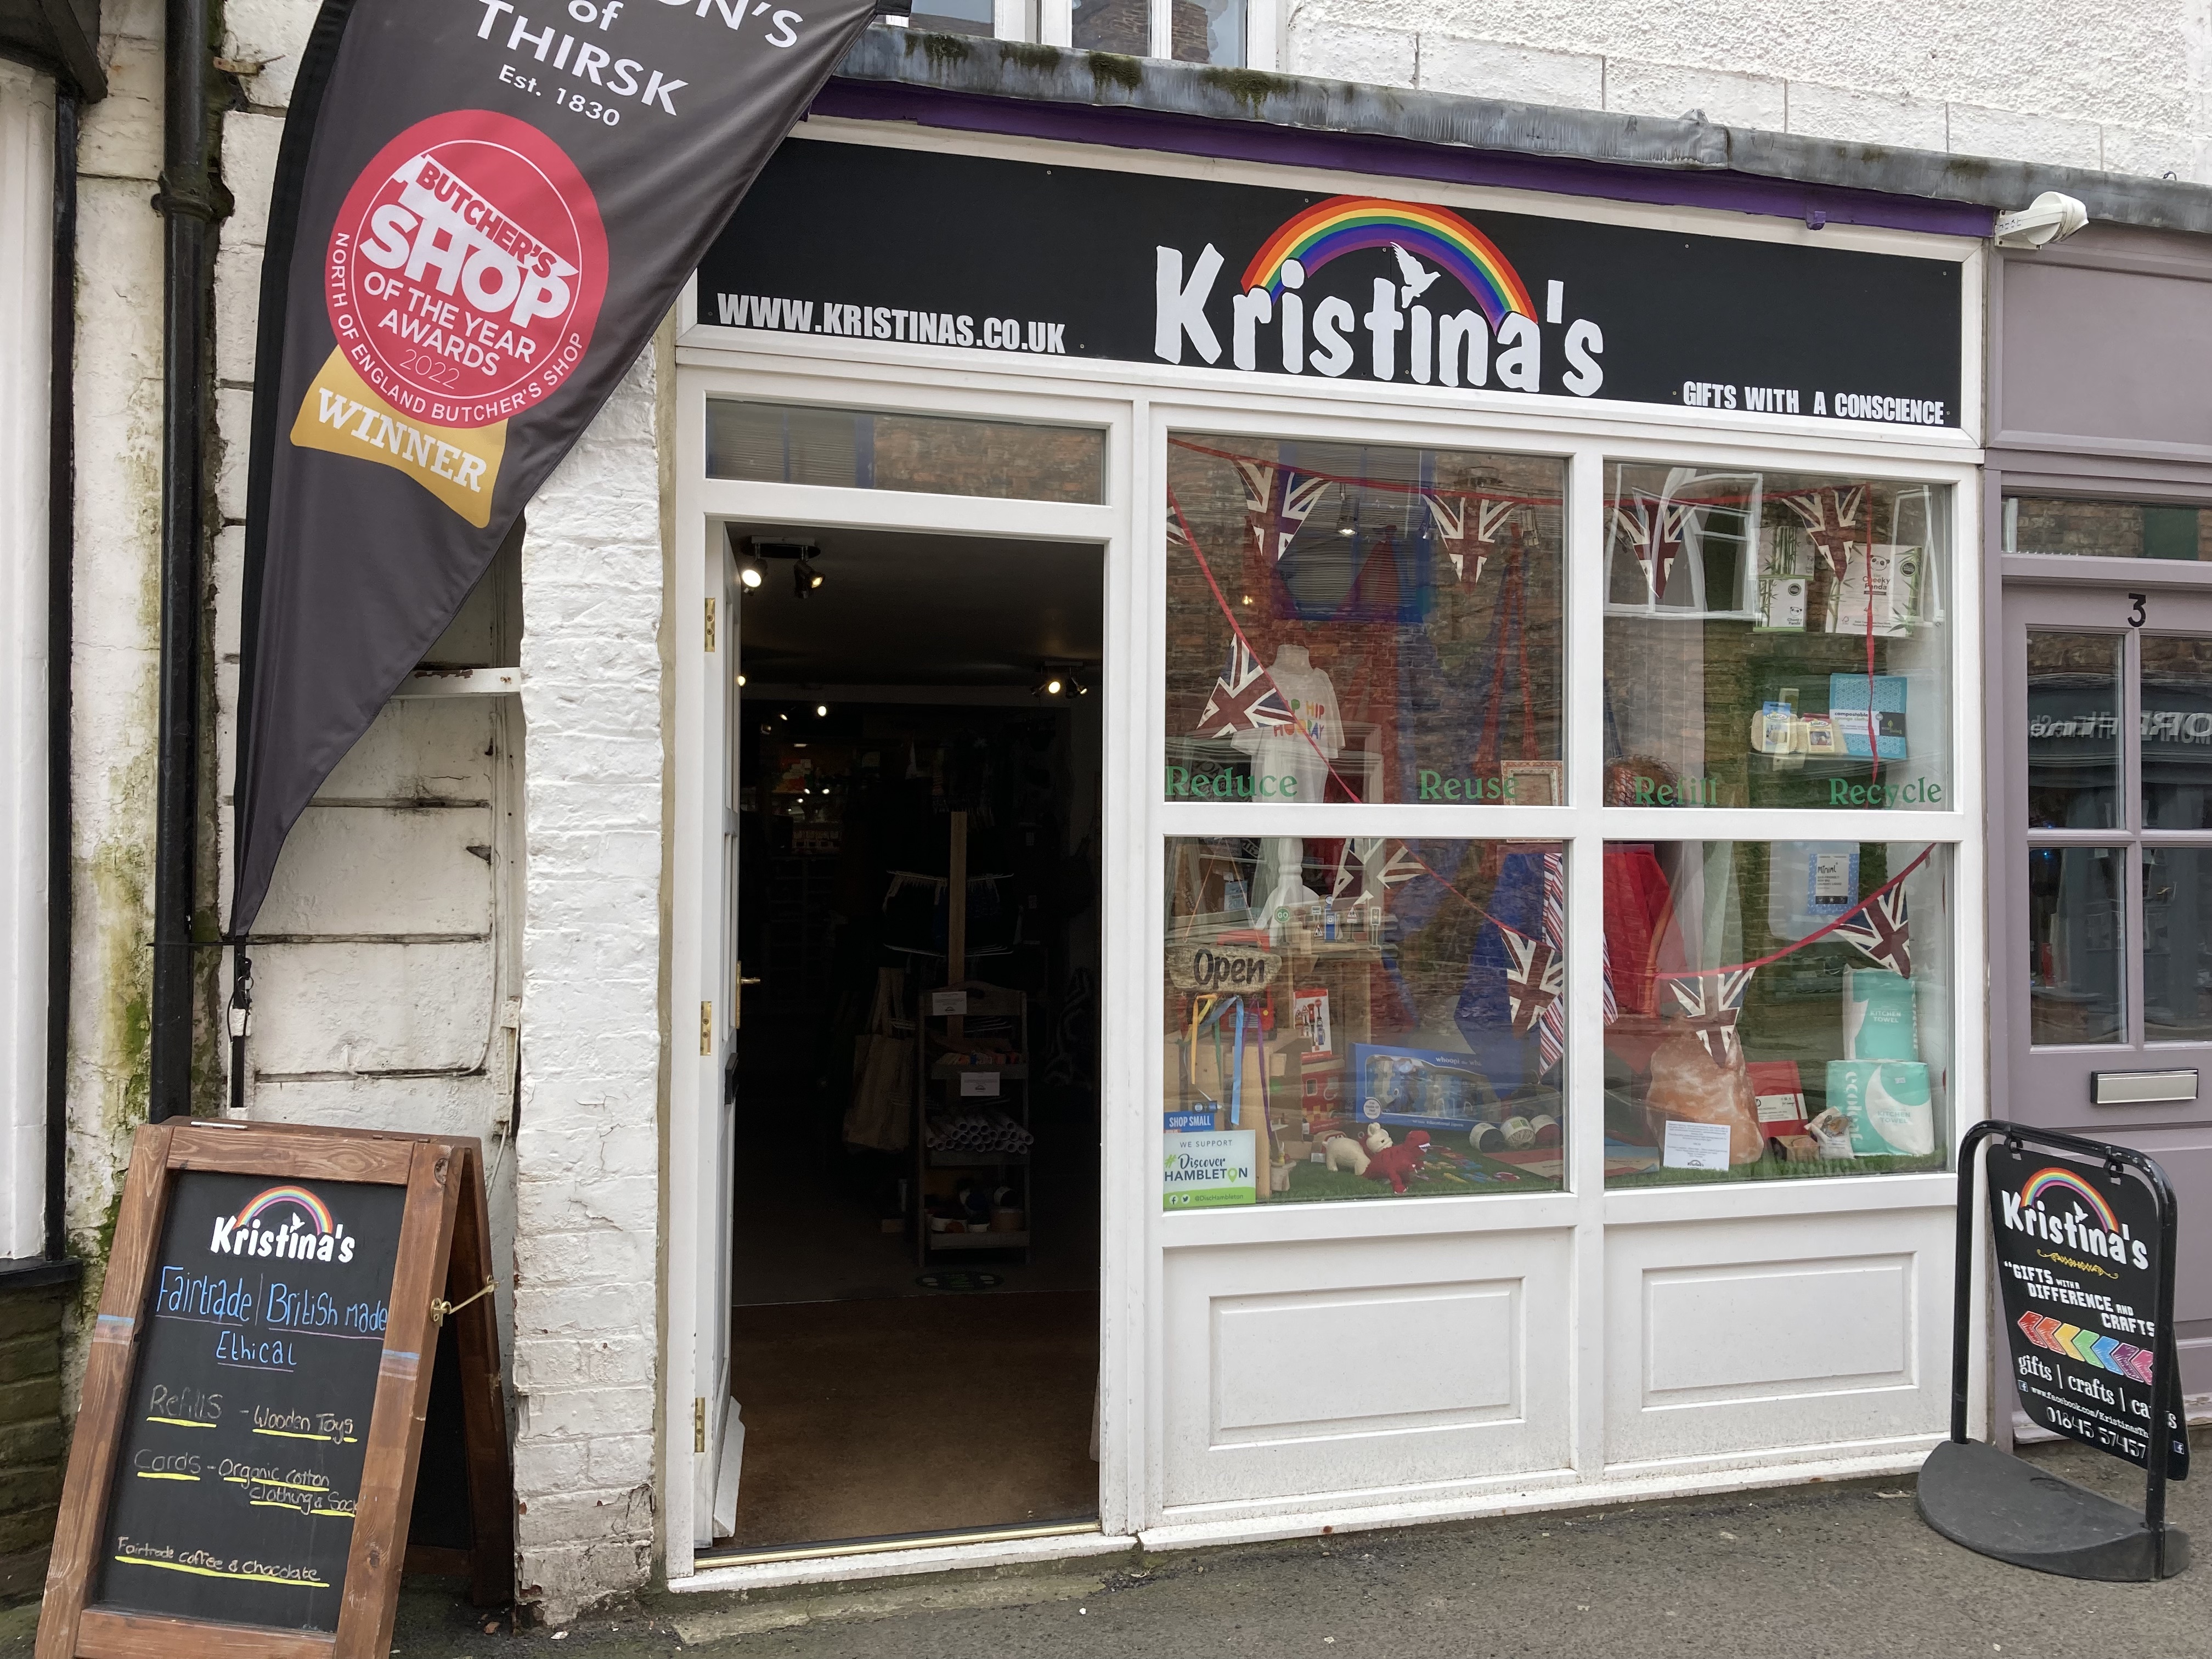 Kristina's is the place to find all of your ethical shopping in Thirsk. We try our very best to offer a wide range of ethical products from children's clothing to laundry liquid. Our ranges include Organic cotton baby and children's clothing, Wooden toys, greetings cards, gifts, homewares, green living products refills and more.